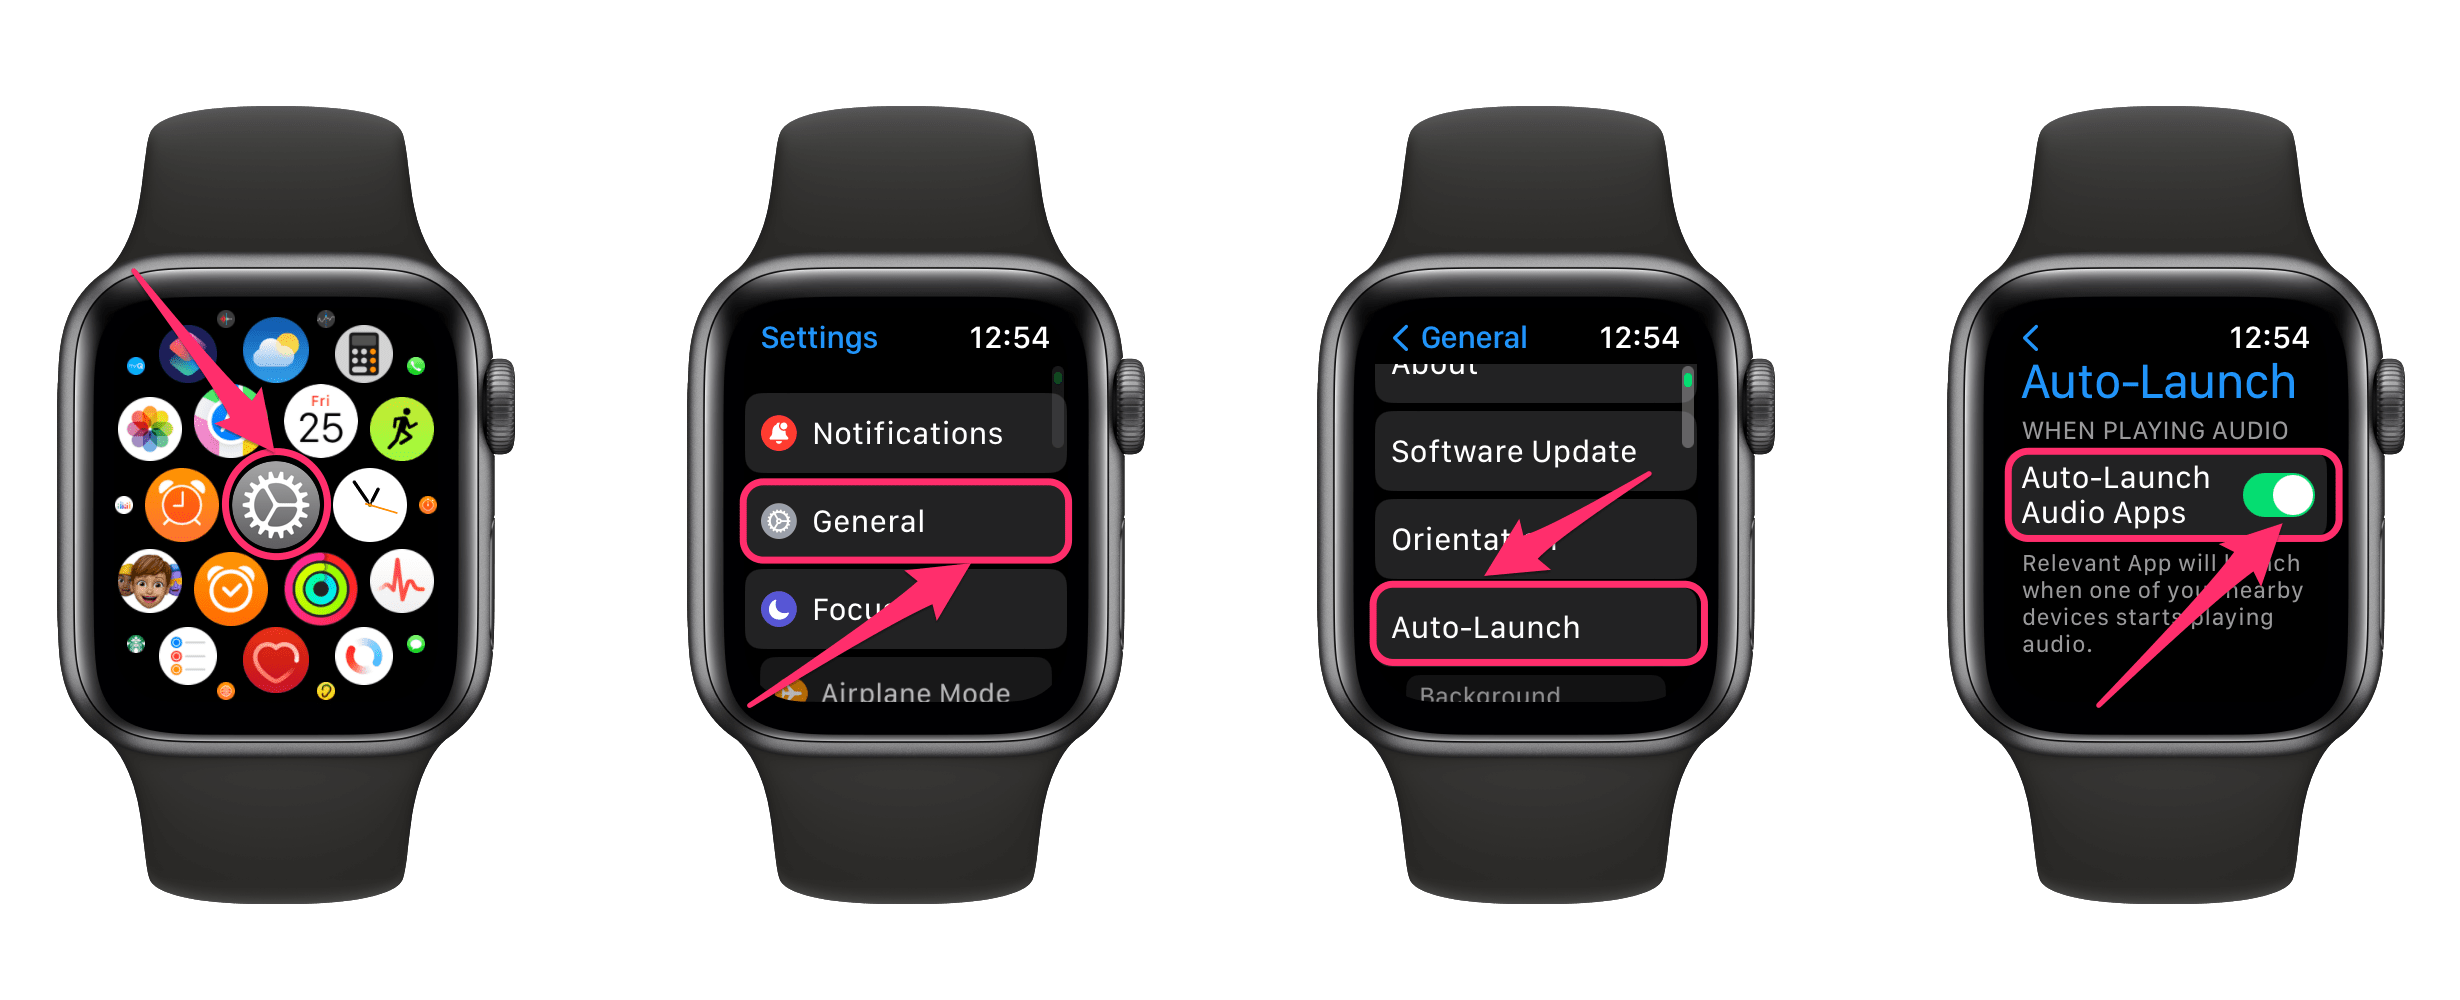 turn off auto-launch using Apple Watch